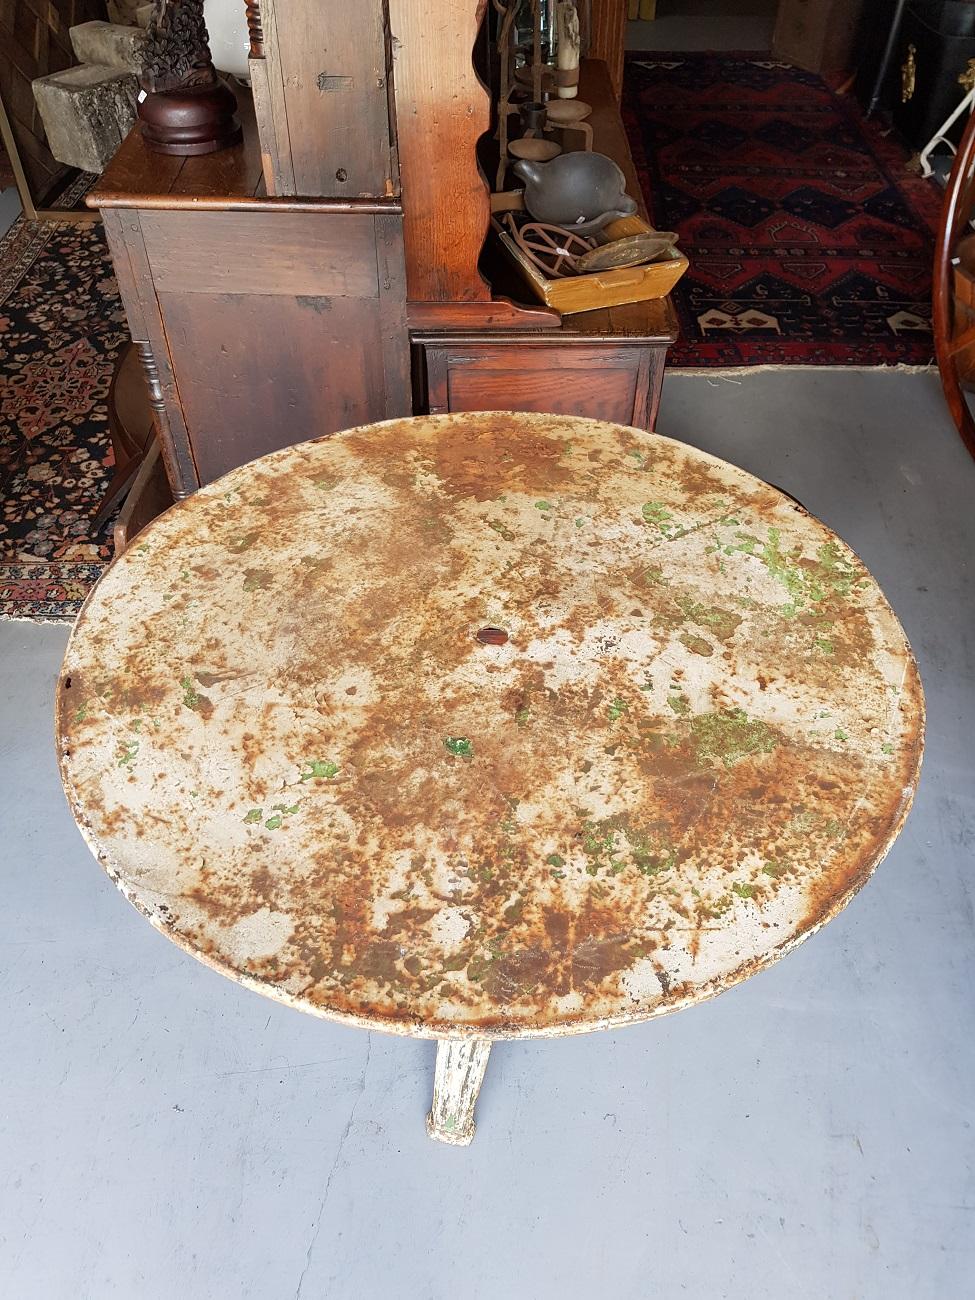 French Art Deco metal garden table from around the 1930s with a beautiful feet in typical Art Deco style, the top has a few holes and further in a solid condition.

The measurements are,
Depth 98 cm/ 38.5 inch.
Width 98 cm/ 38.5 inch.
Height 72